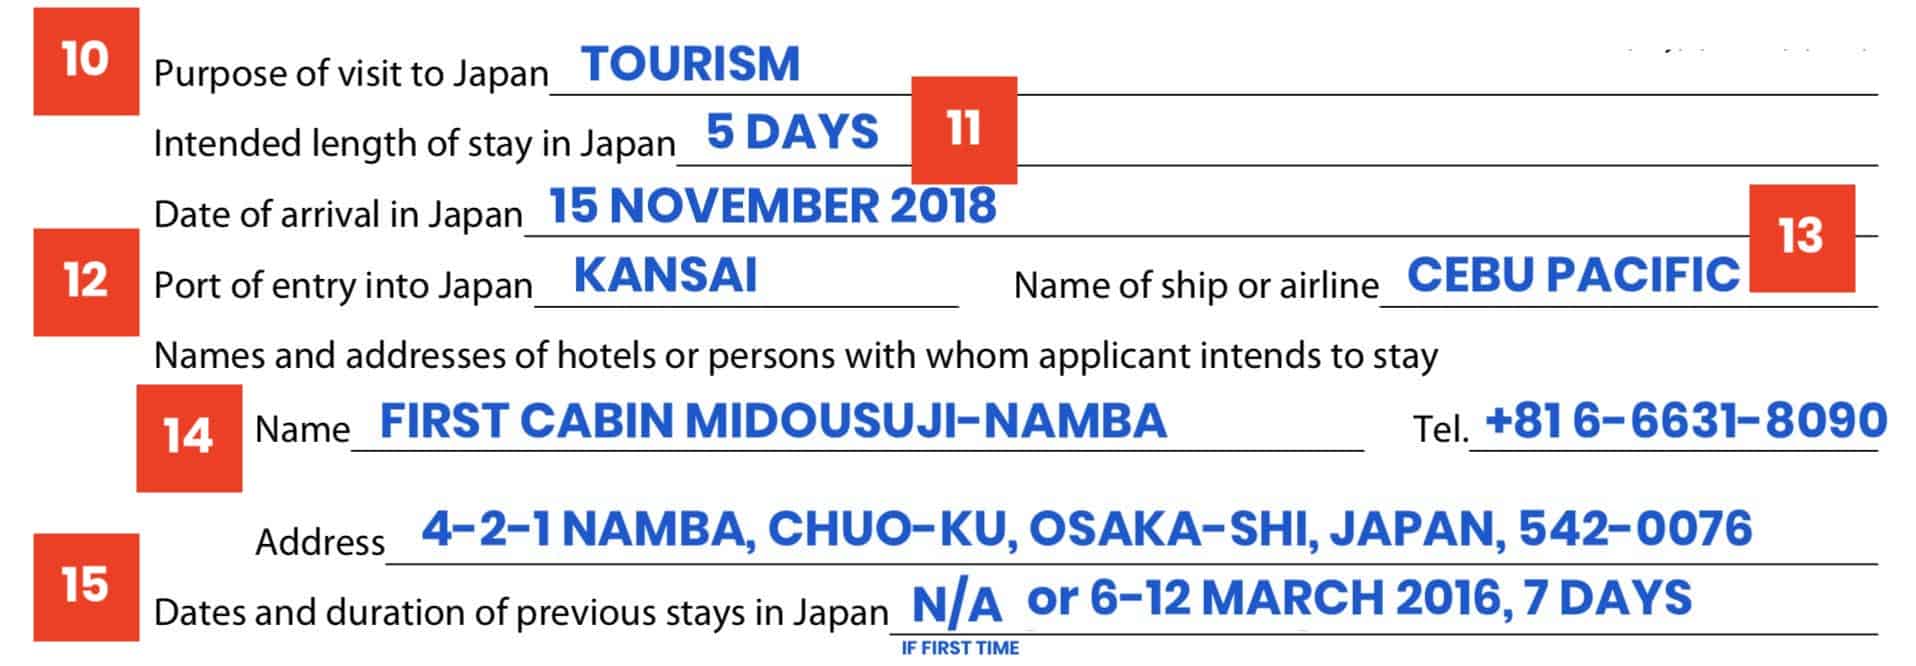 Japan Visa Application Form Sample How To Fill It Out The Poor Traveler Itinerary Blog